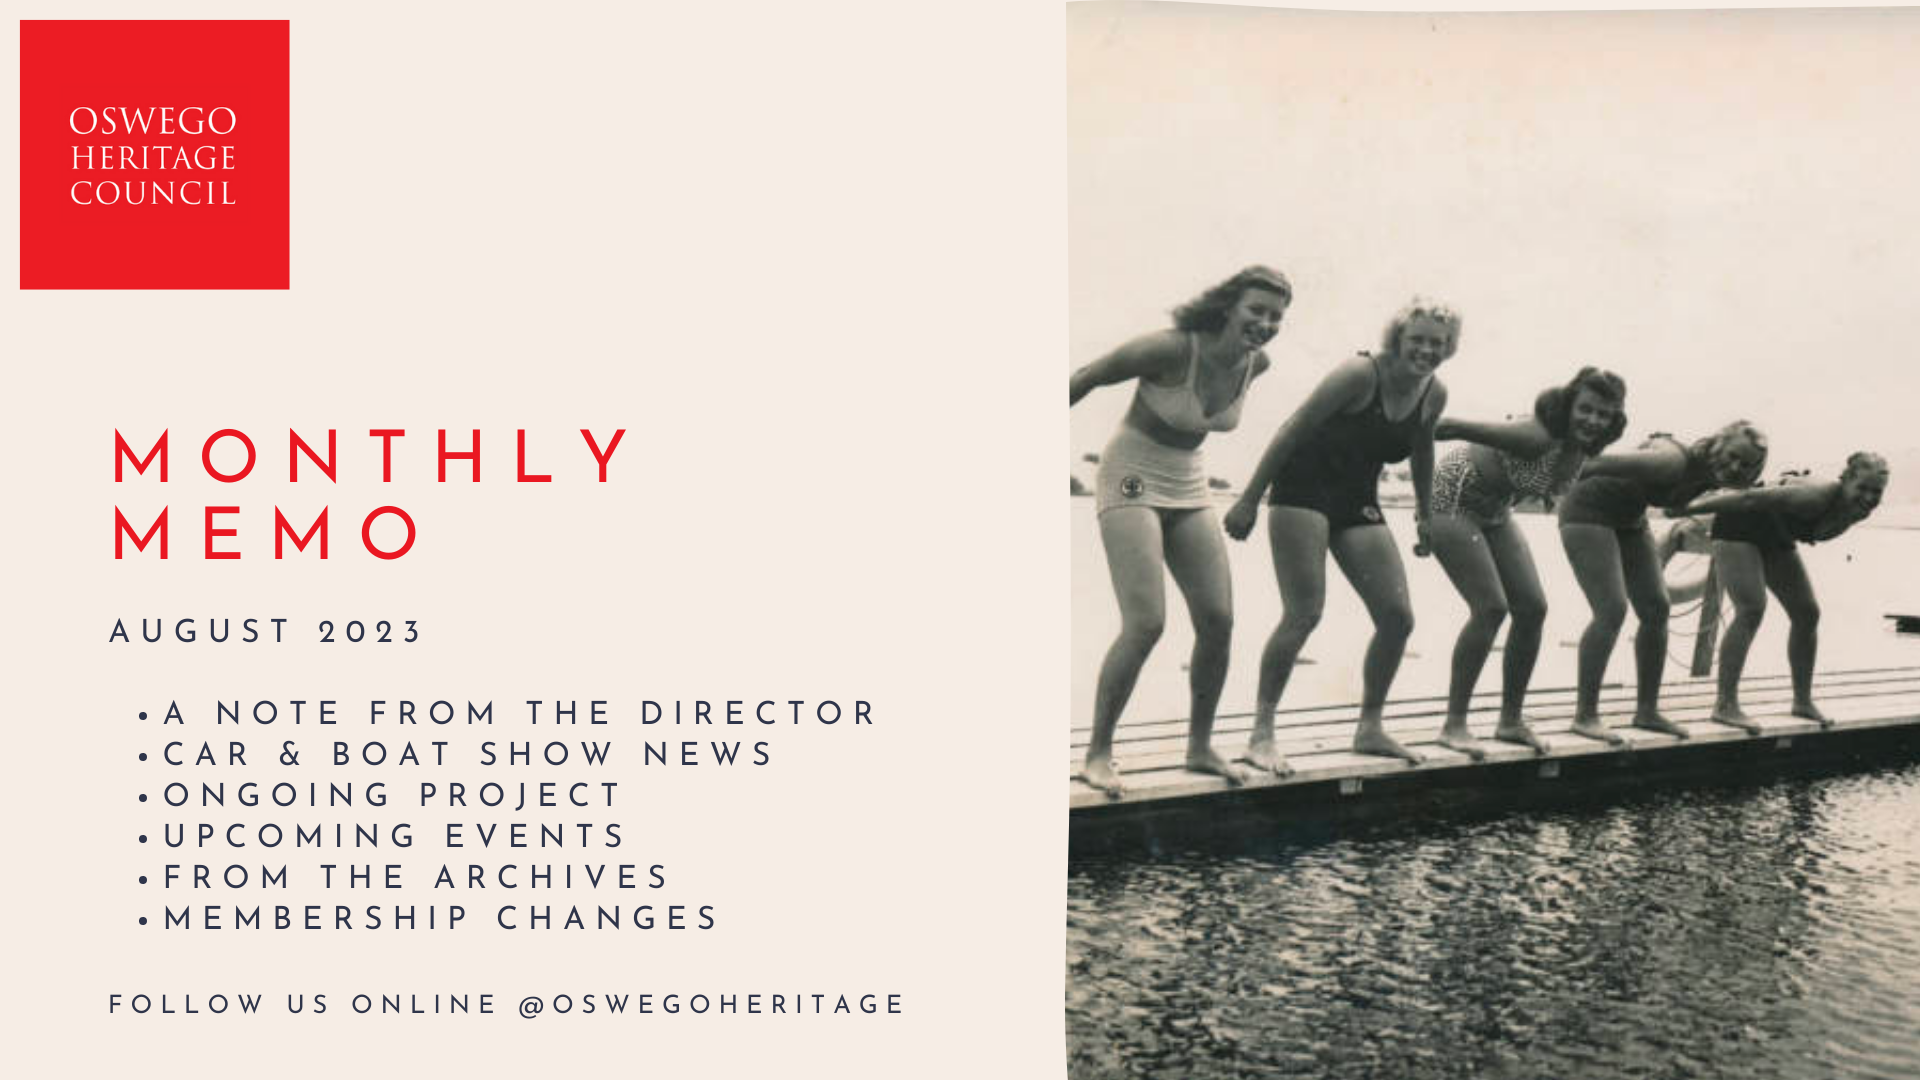 Monthly memo for August 2023, featuring: a note from the director, car & boat show news, ongoing project, upcoming events, from the archives, membership changes. Follow us online @oswegoheritage. Picture to the right of five young women from circa 1950 in bathing suits, about to jump into Lake Oswego.